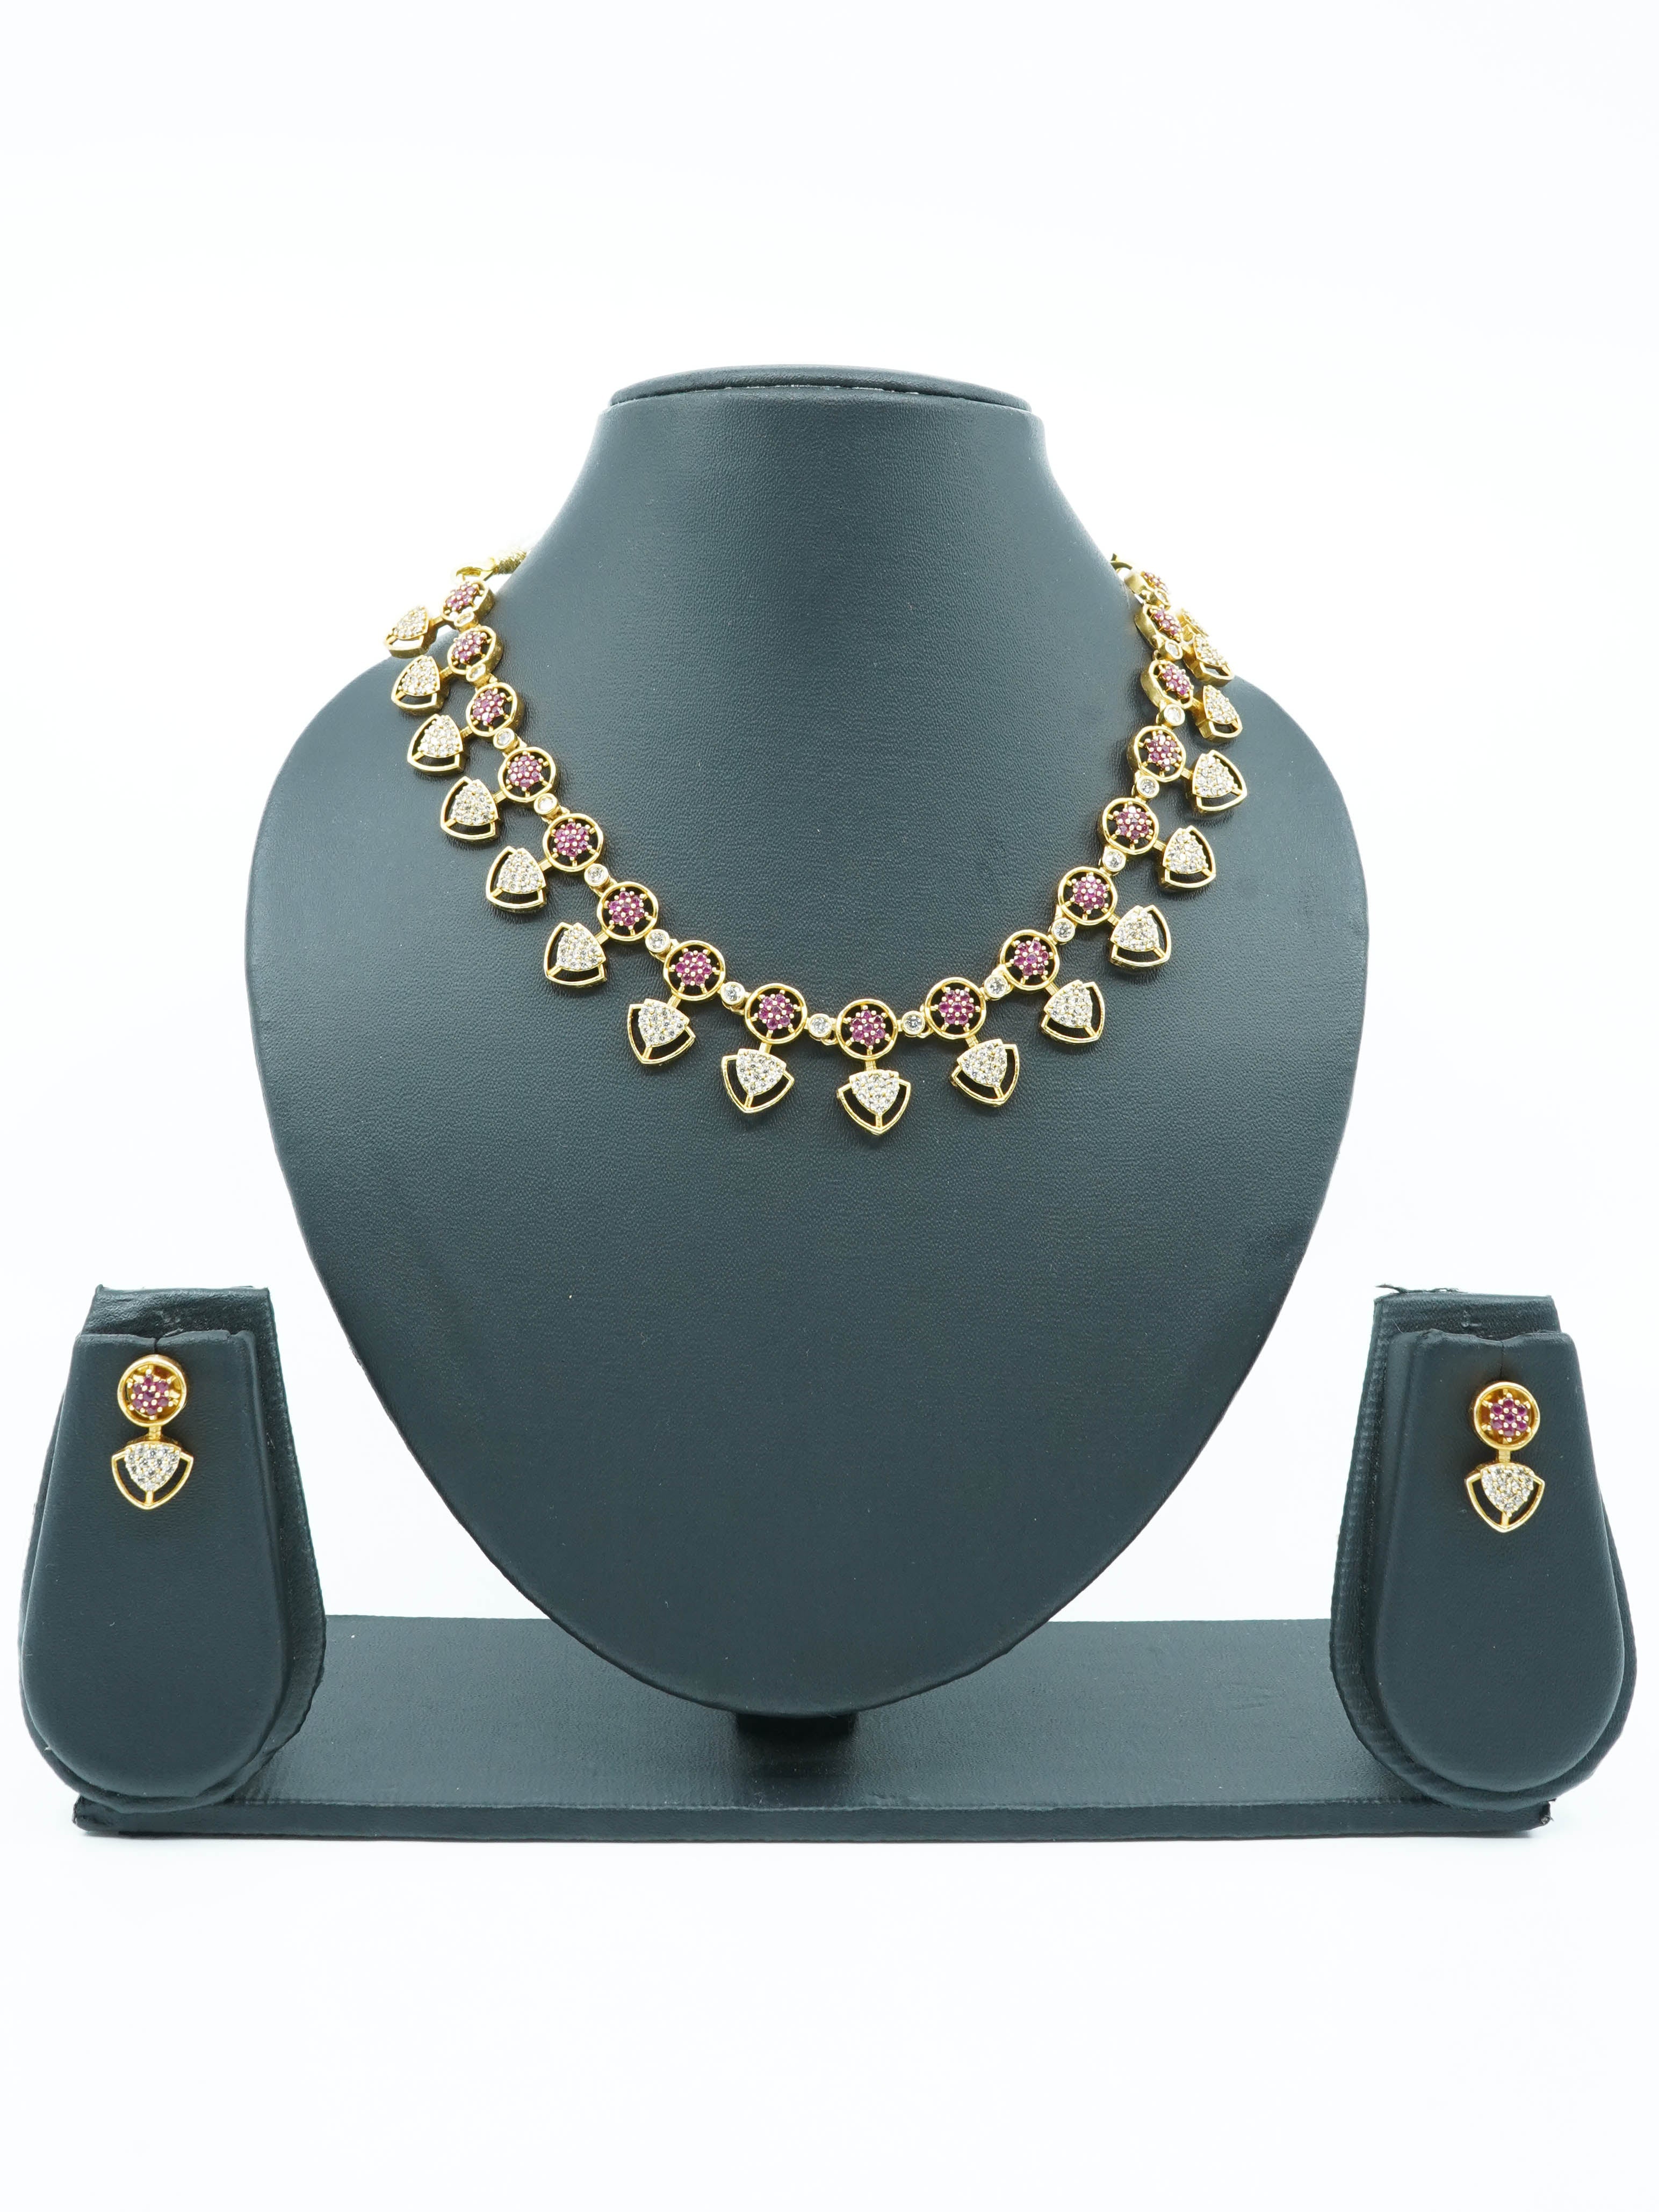 23.5kt Guaranteed Gold finish Evergreen Trending designs Short AD necklace set  11665n